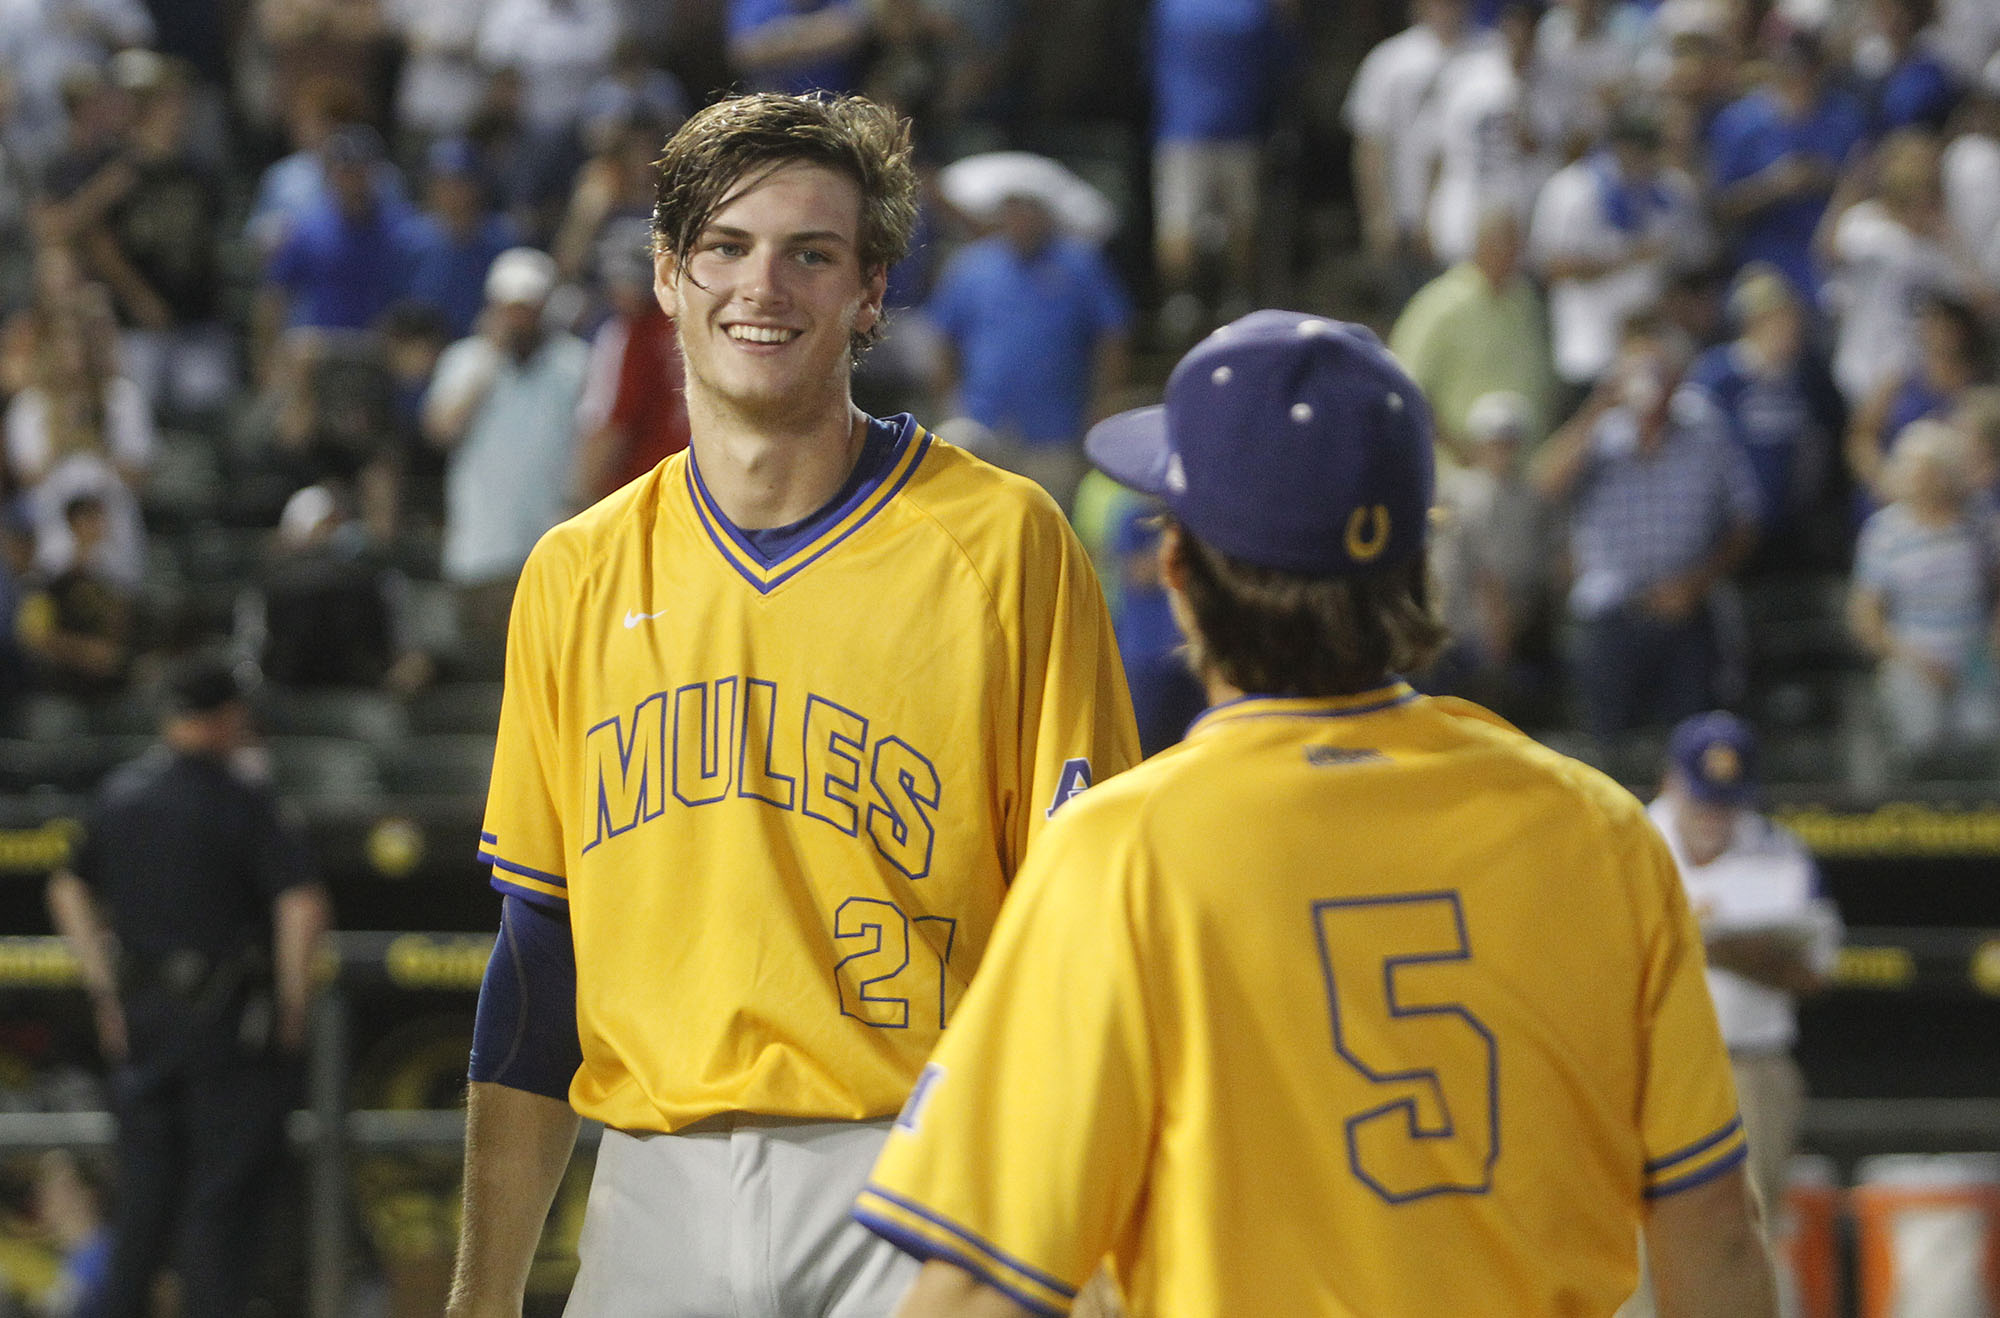 After being drafted by Astros, Whitley pitches Alamo Heights to title game